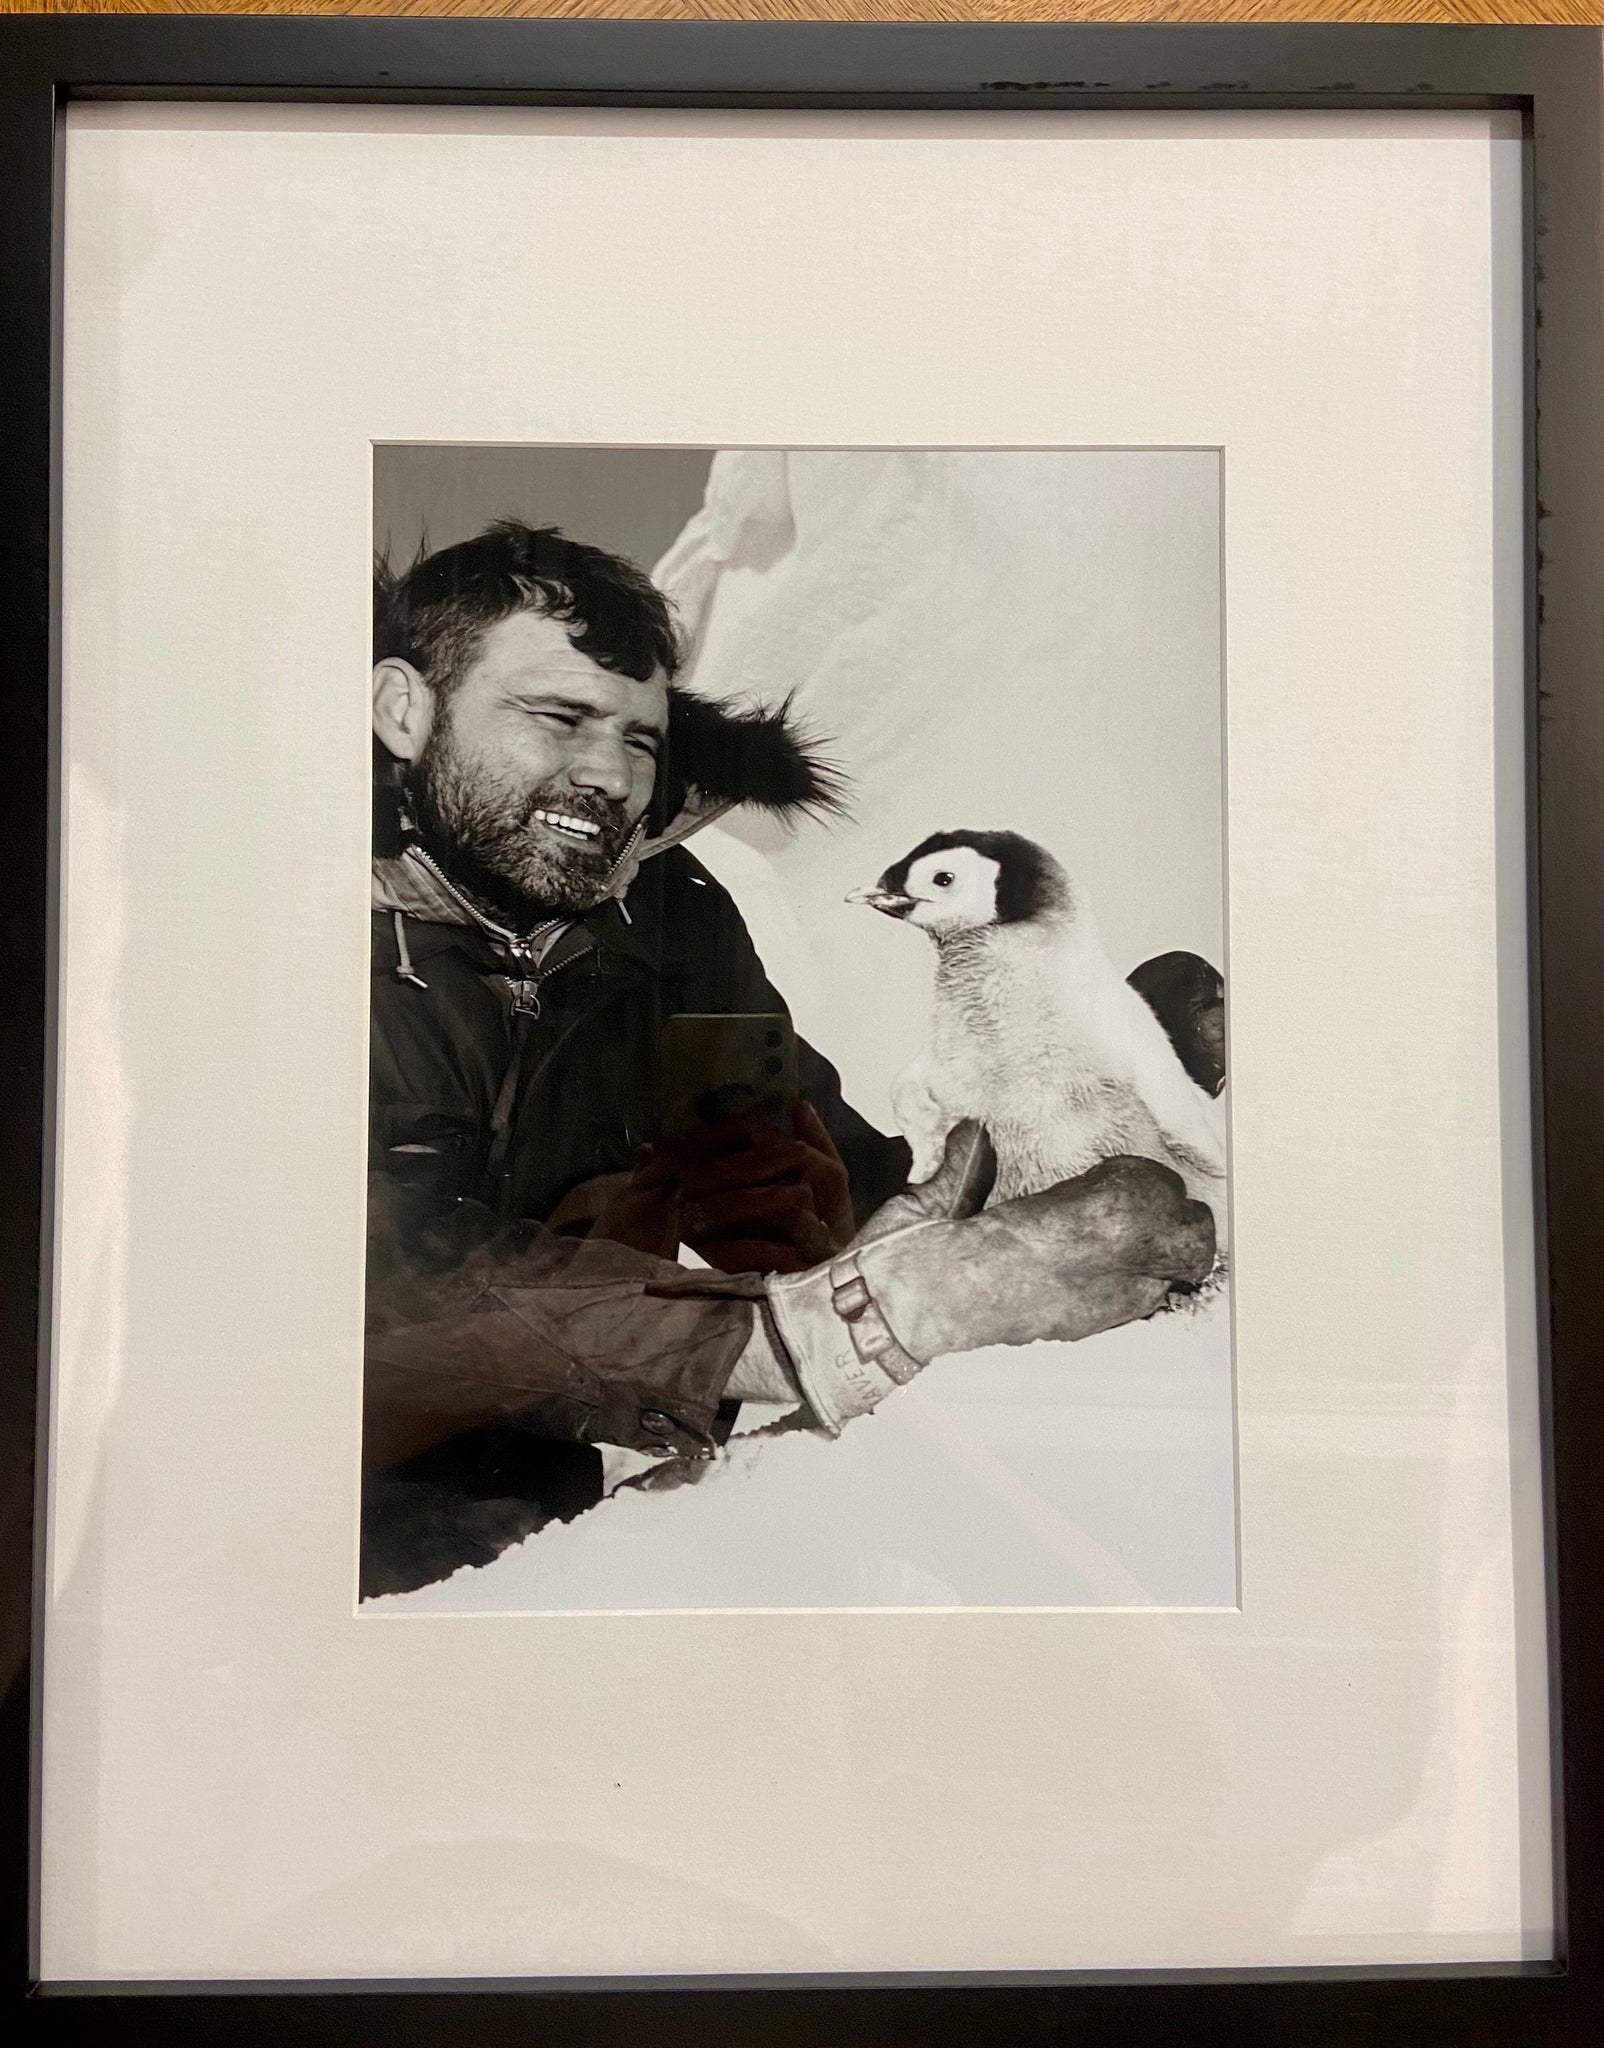 Navy Aviation Mechanic gets Acquainted with Emperor Penguin Chick